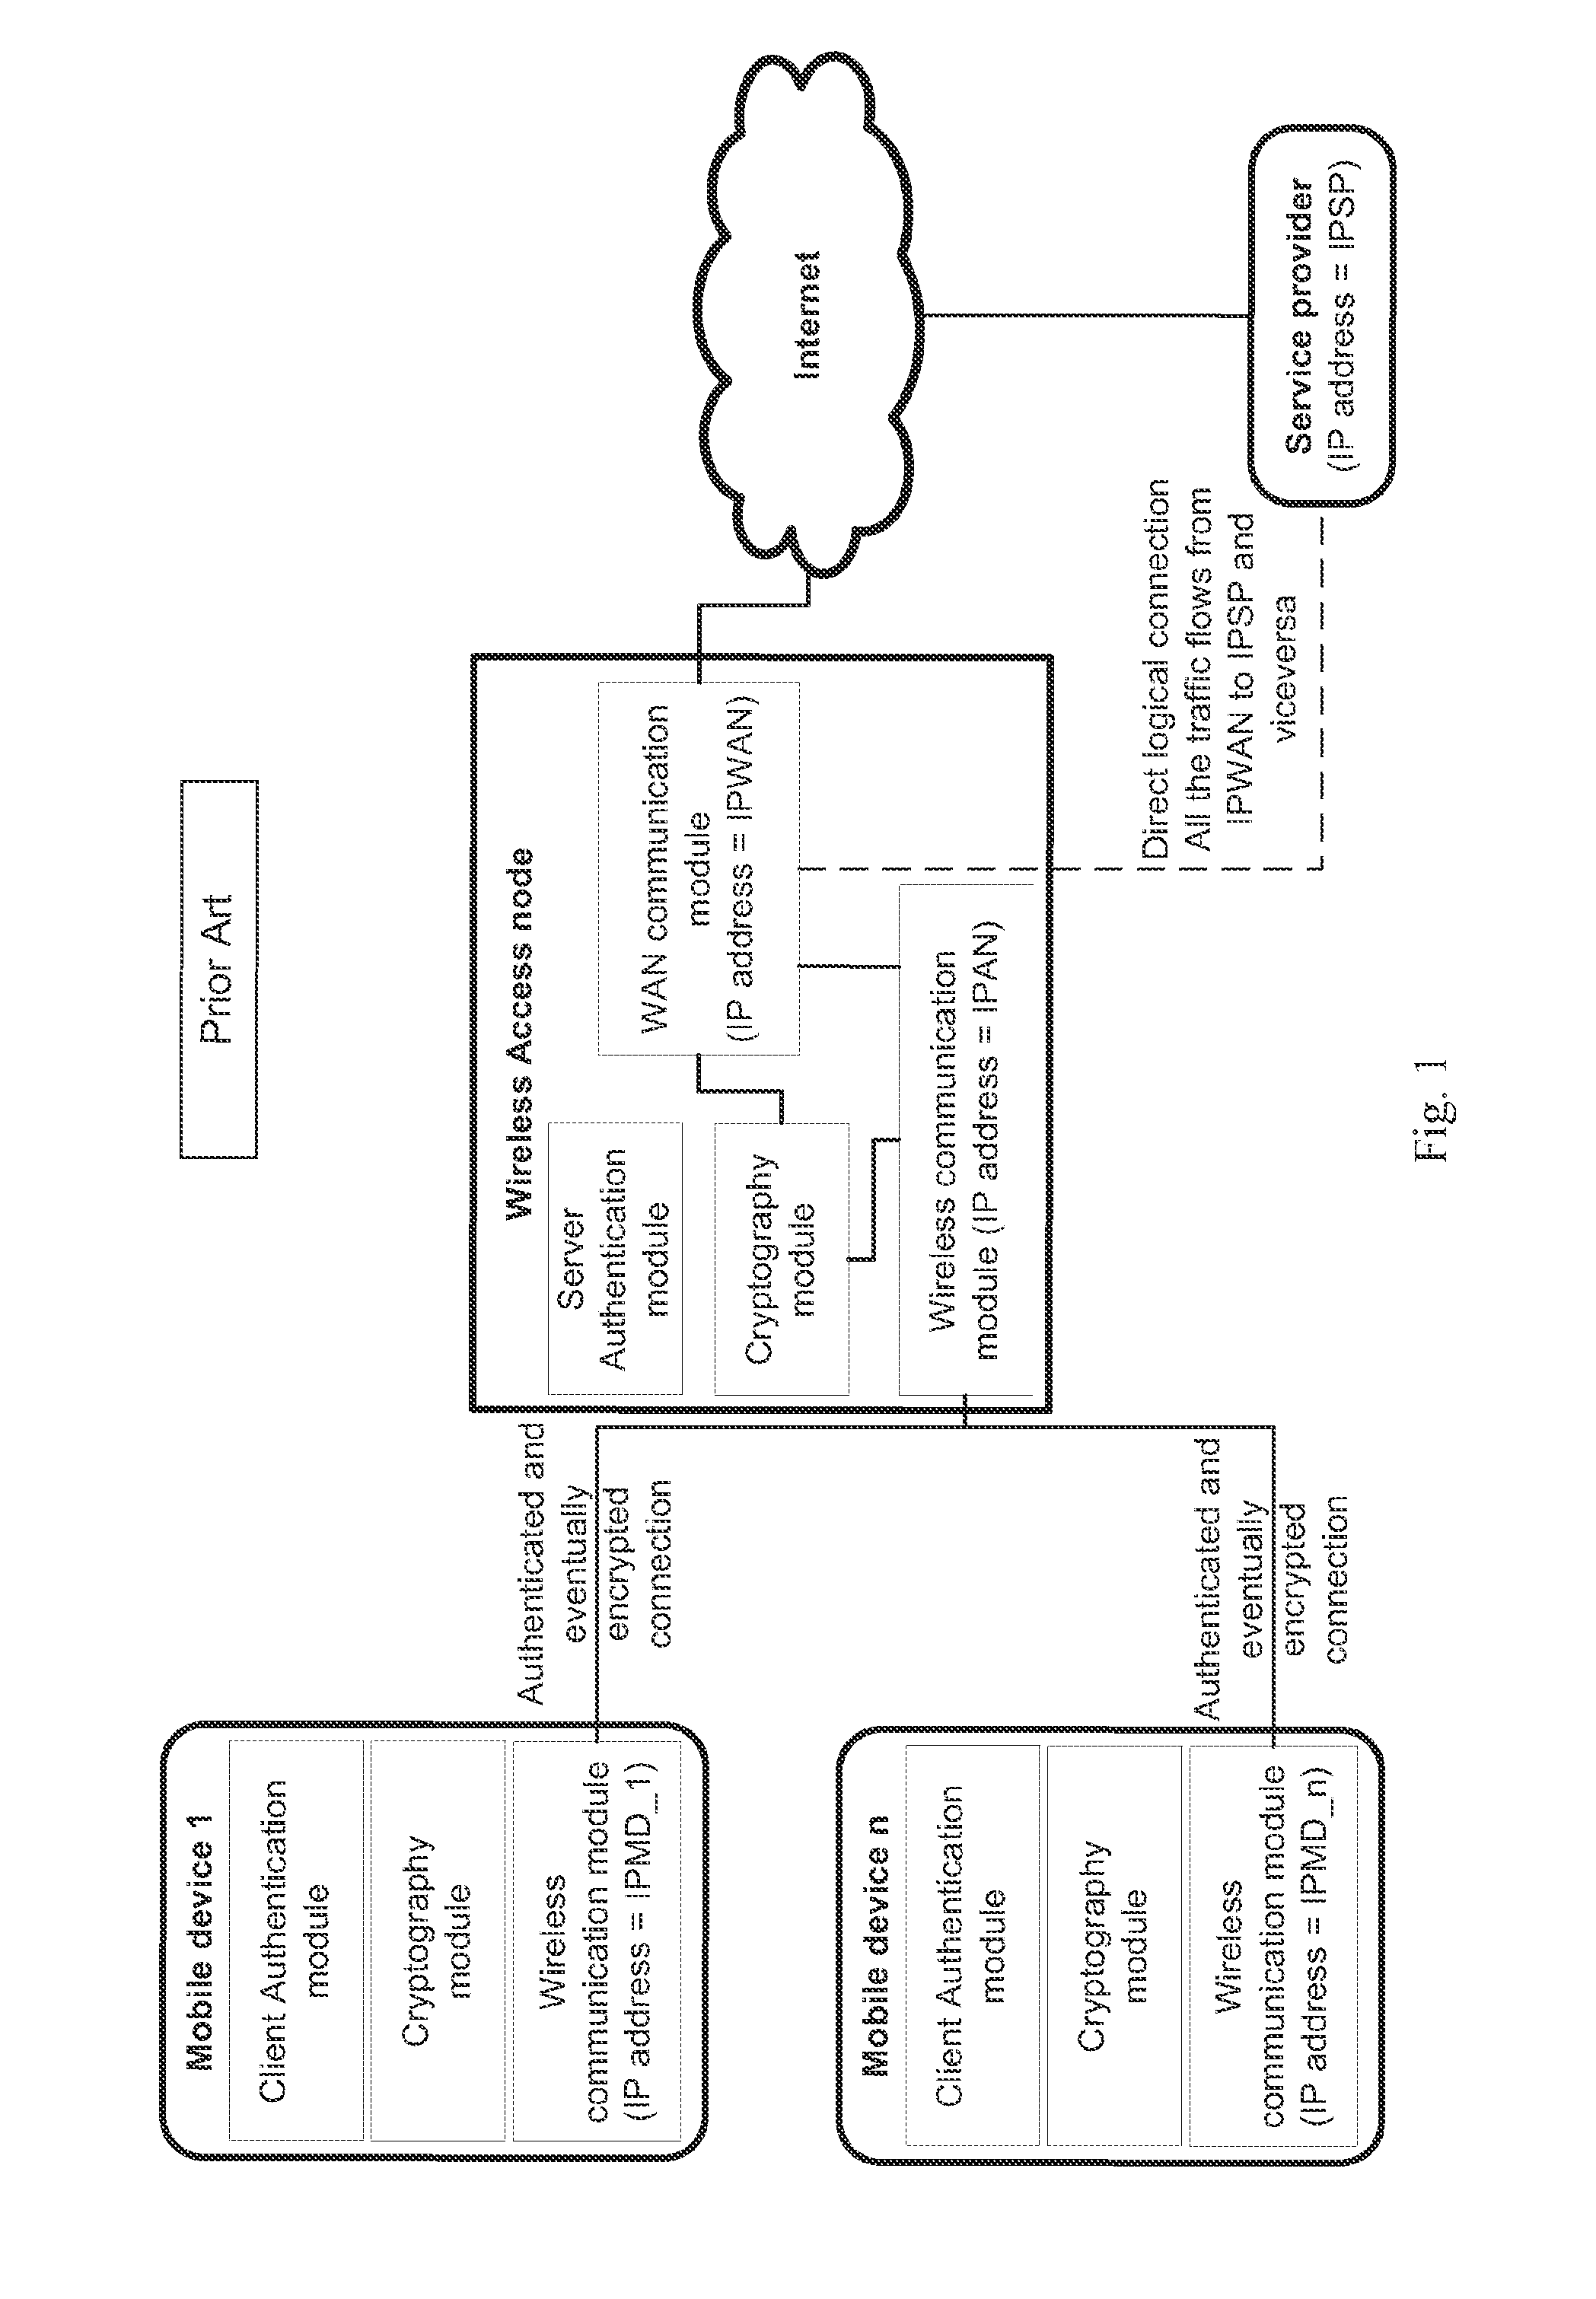 Method and system for wireless connecting a mobile device to a service provider through a hosting wireless access node